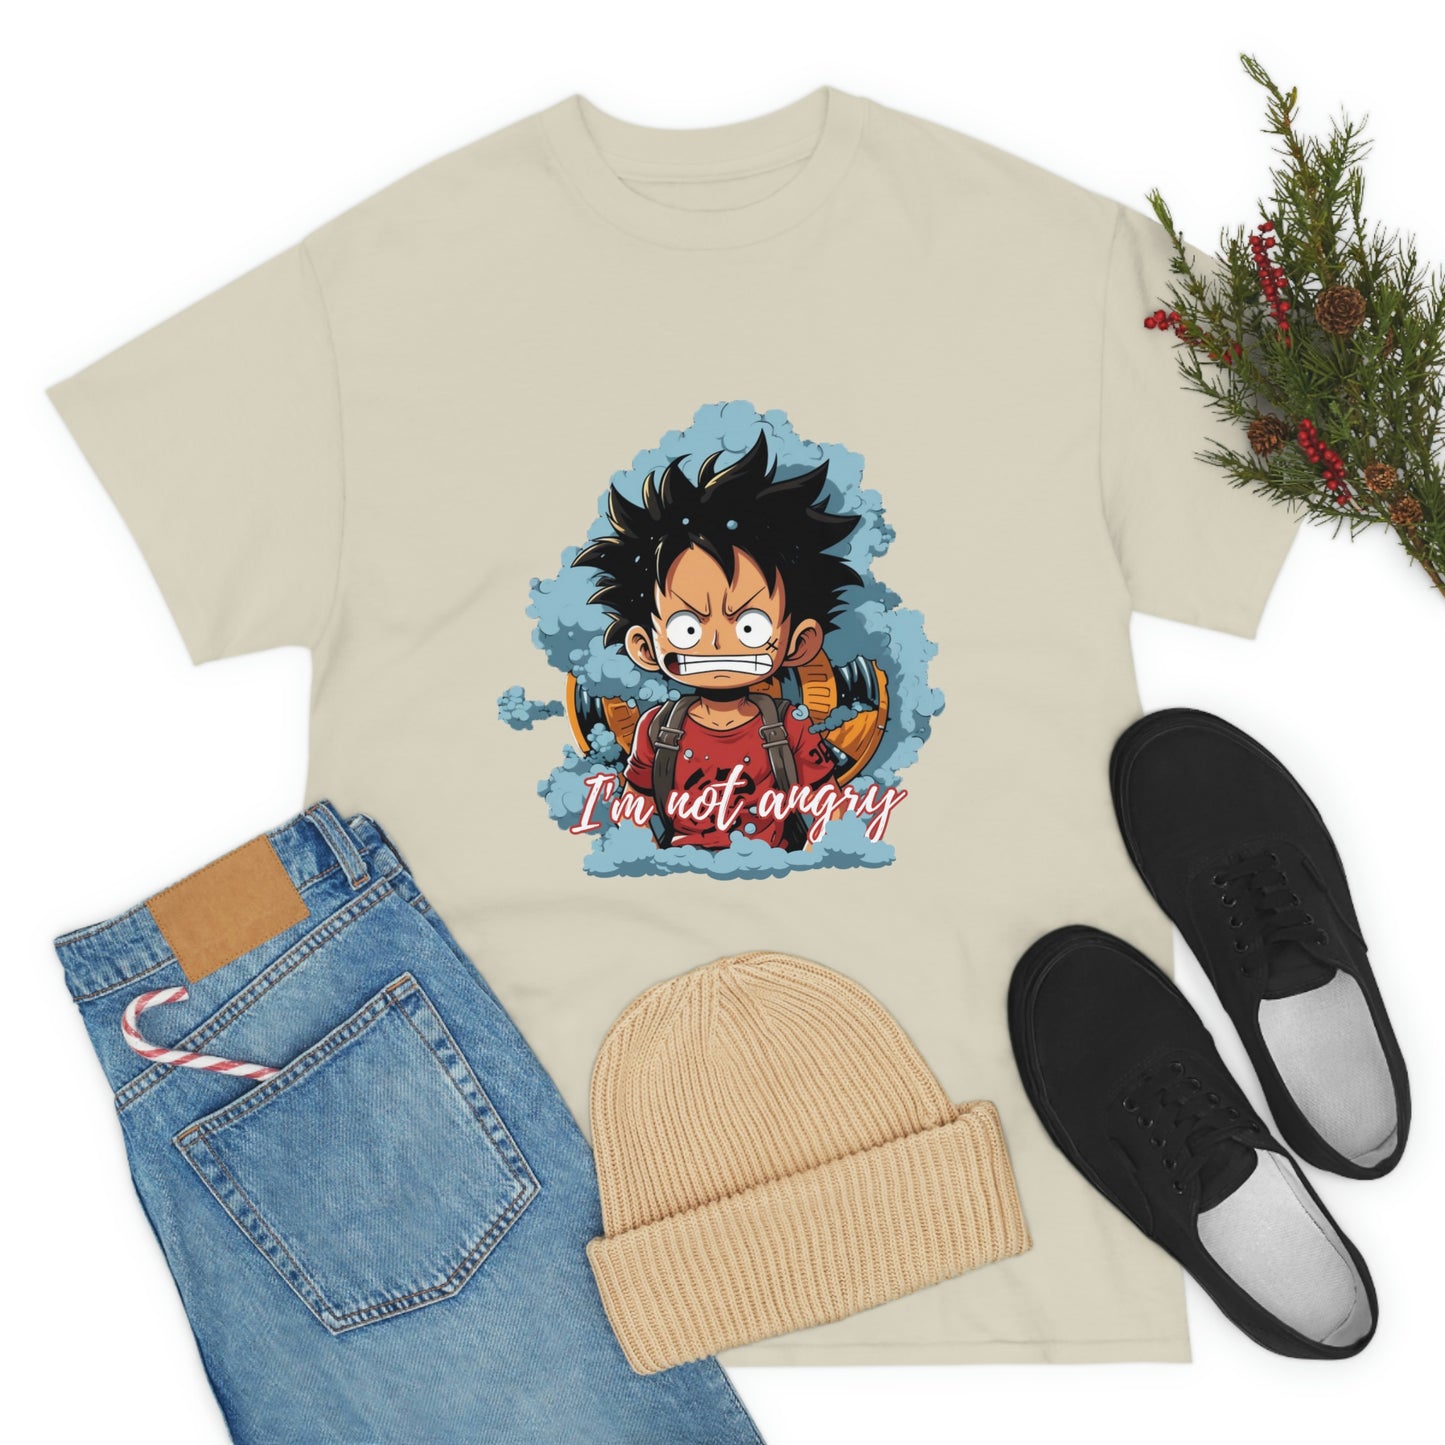 Show off your love for One Piece with our Unisex Heavy Cotton Tee featuring a cute image of Luffy, made with high-quality material and built to last.